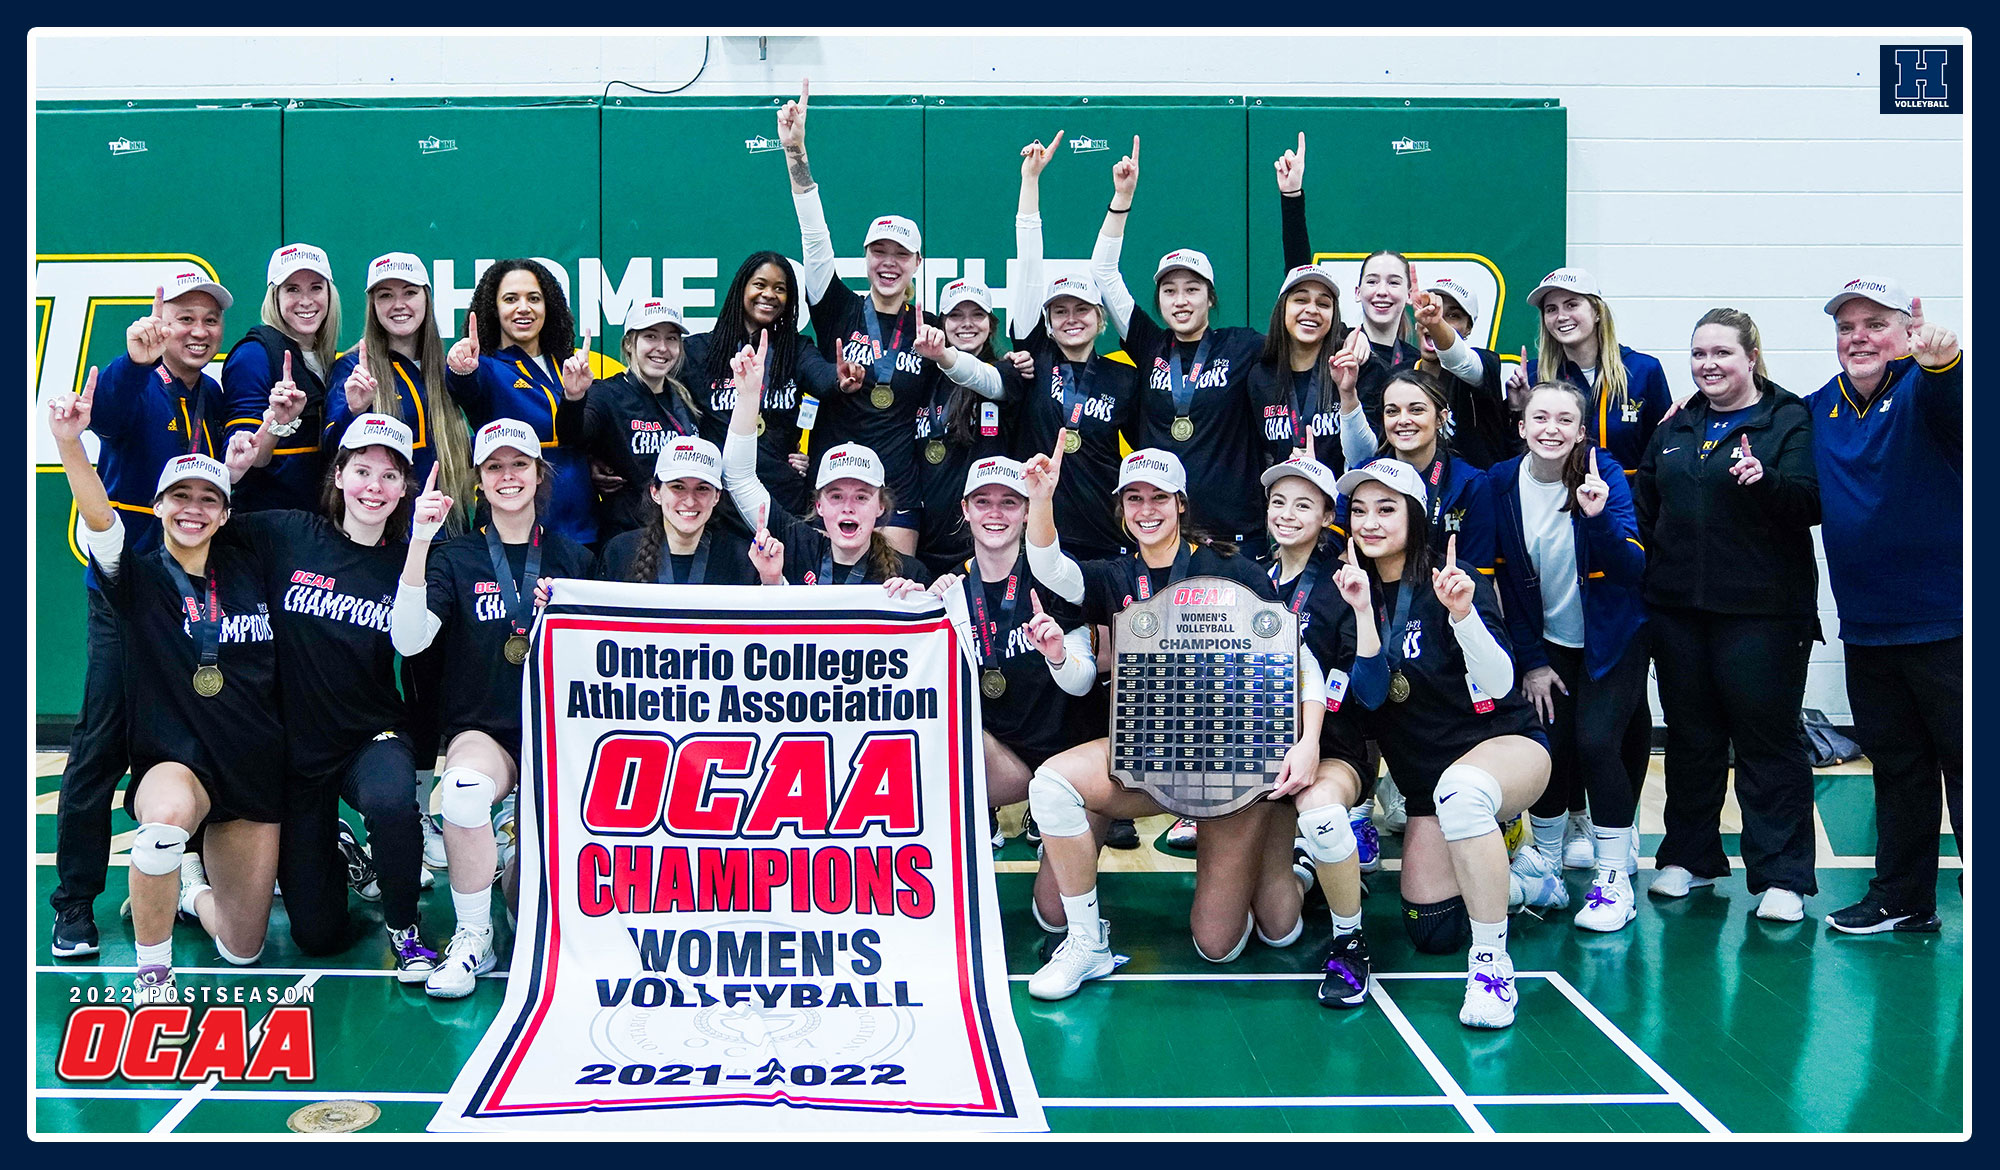 Women's volleyball team banner pic